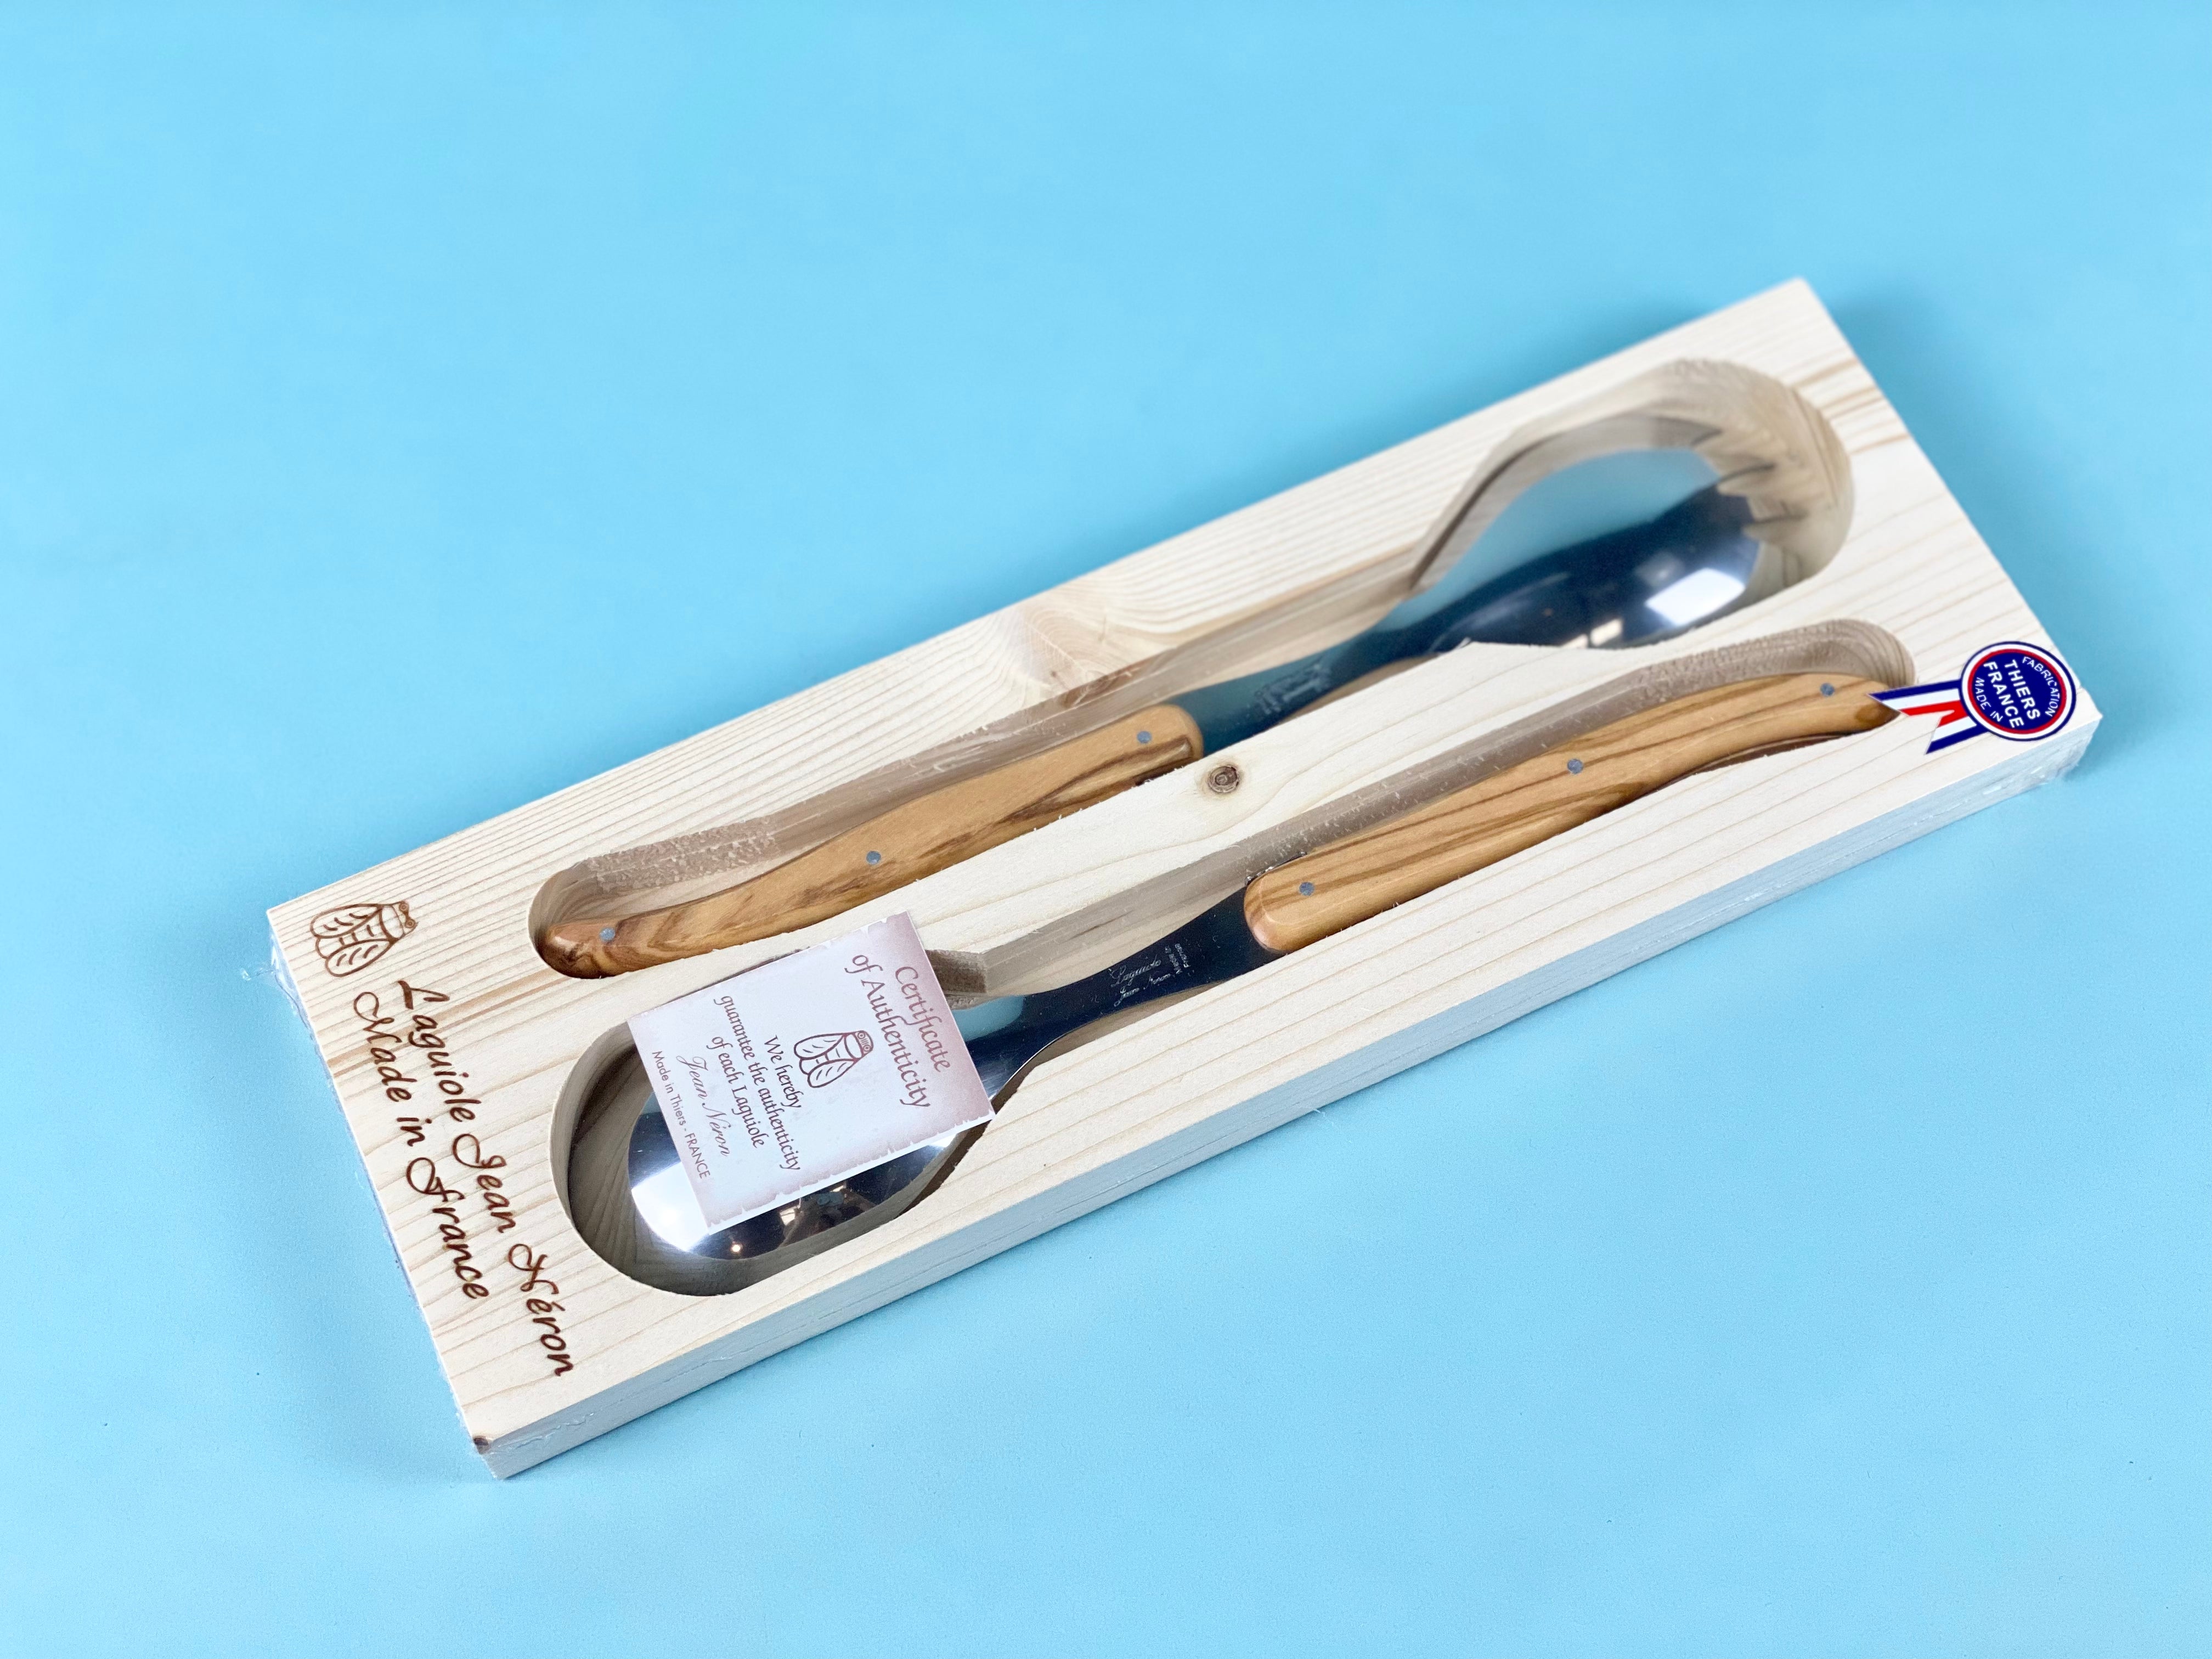 Laguiole French Olivewood Serving Set in Wood Box - Regular Finish Cutlery Laguiole Brand_Laguiole Carving Sets Kitchen_Dinnerware Laguiole PhotoJul27_101649AM